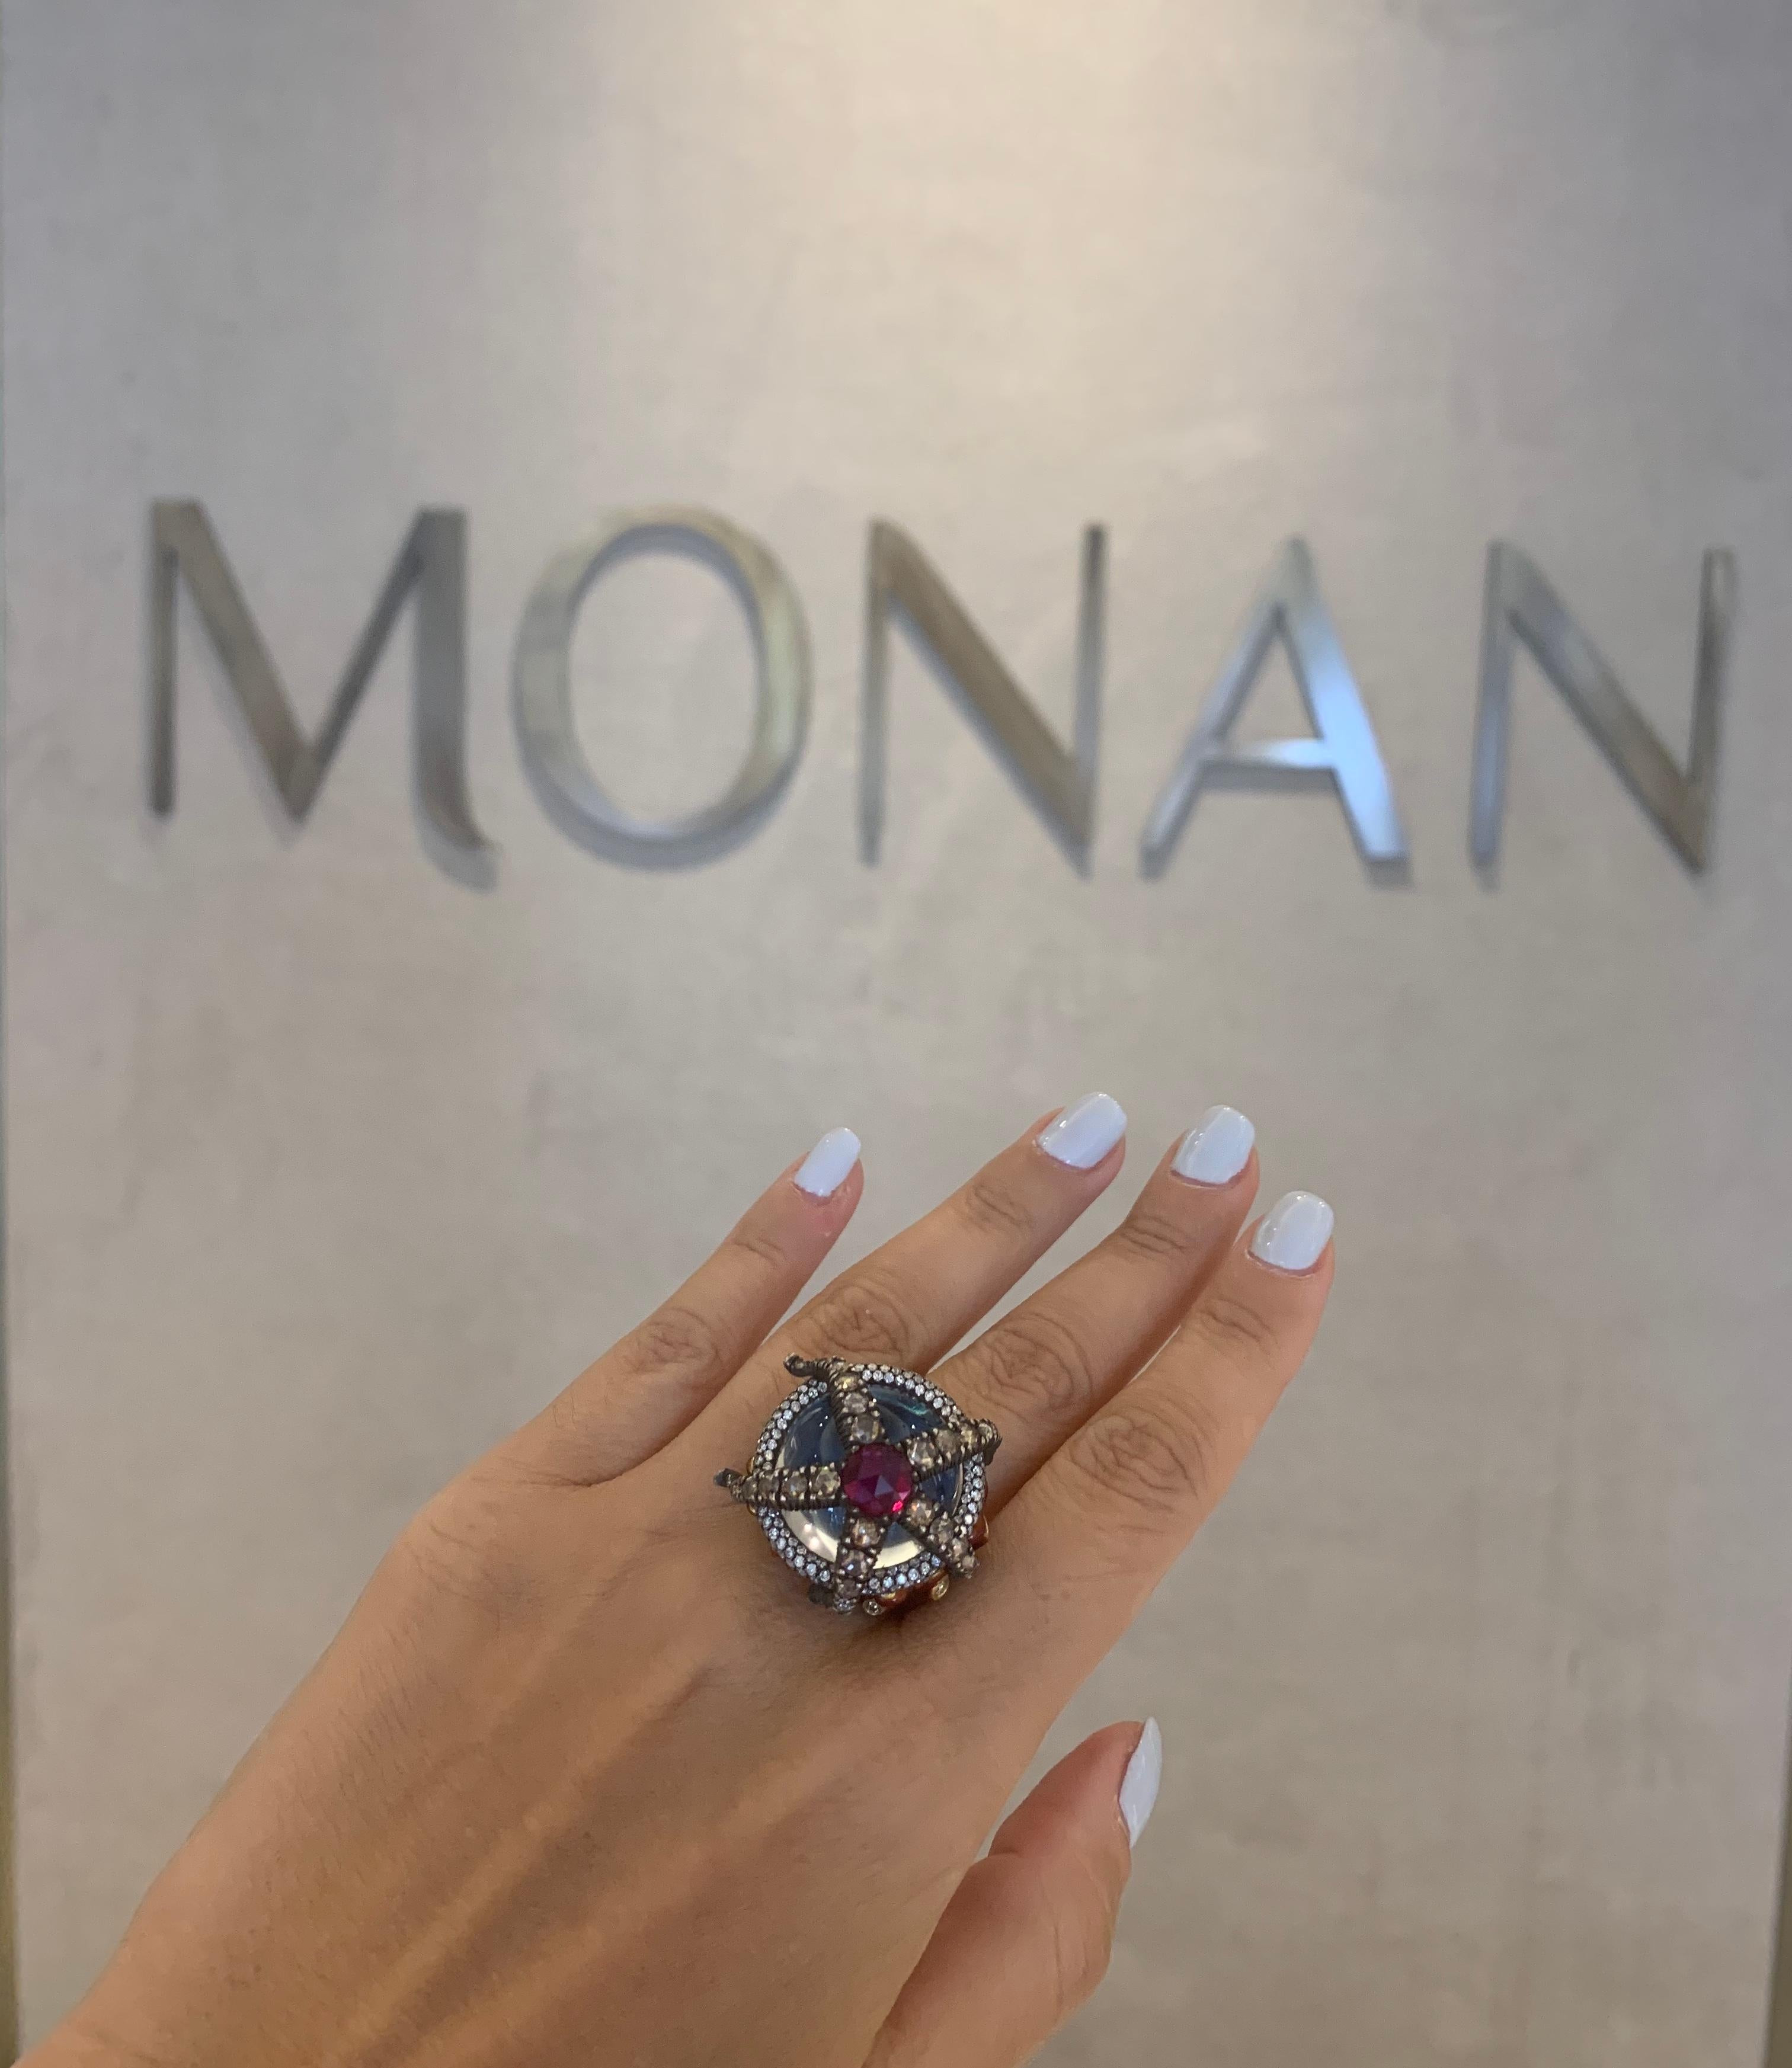 Limited Edition by 2 Starfish Ring from Monan Turquoise Coast Collection with 2.68 ct ruby, 2,20 ct brown and 1,91 ct white diamond set in enameled 18 K gold. Starfish is hanging on rock crystal. You can see the blue enamel part of the ring from the